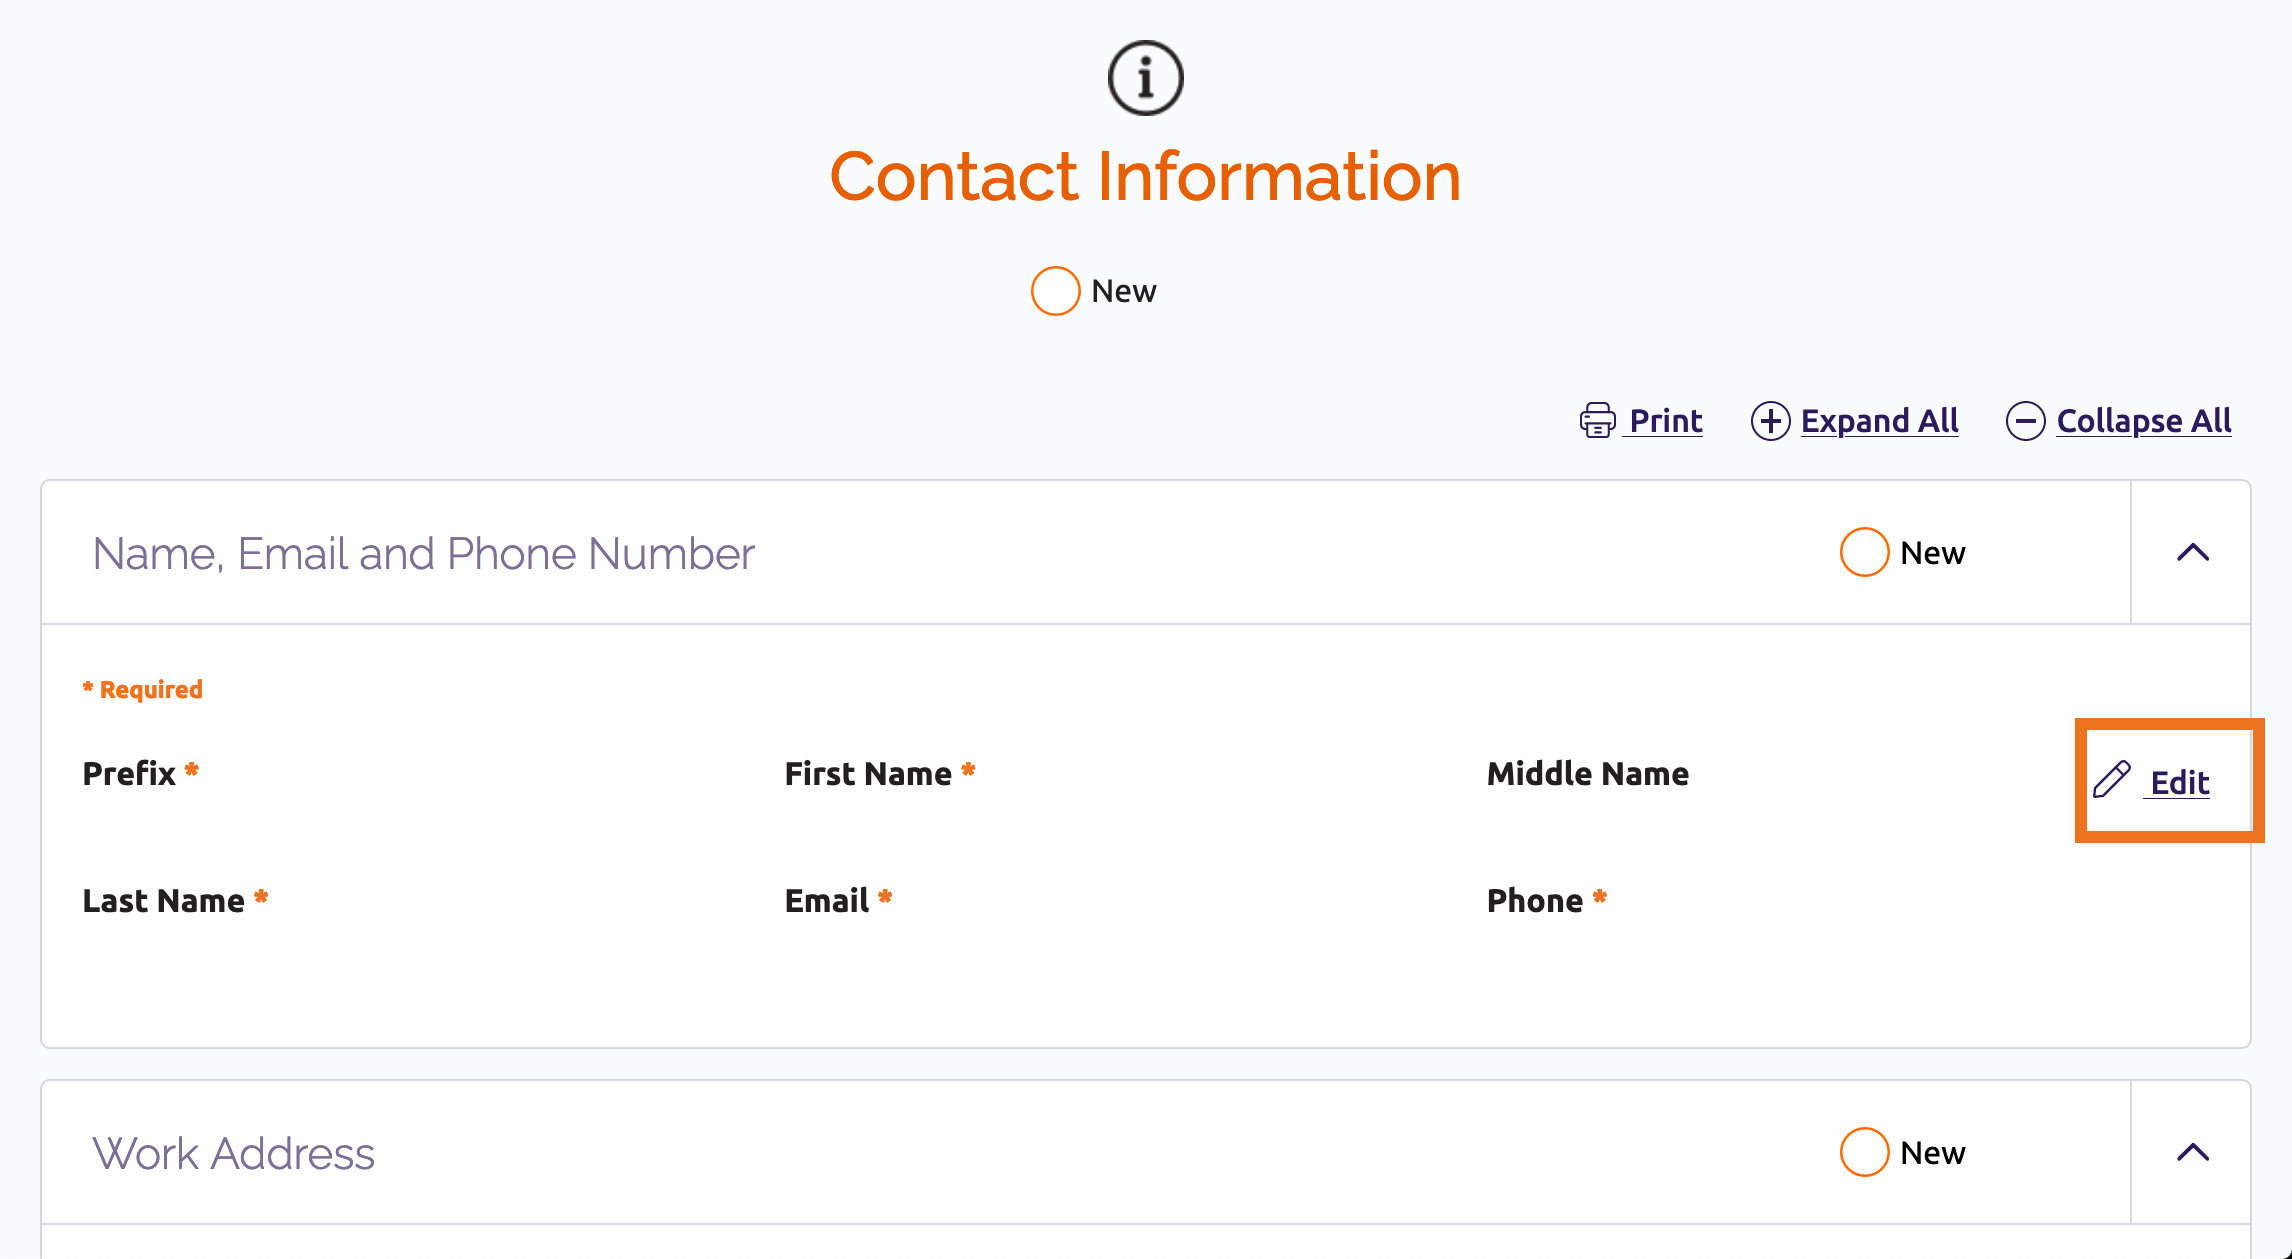 Contact Information section page